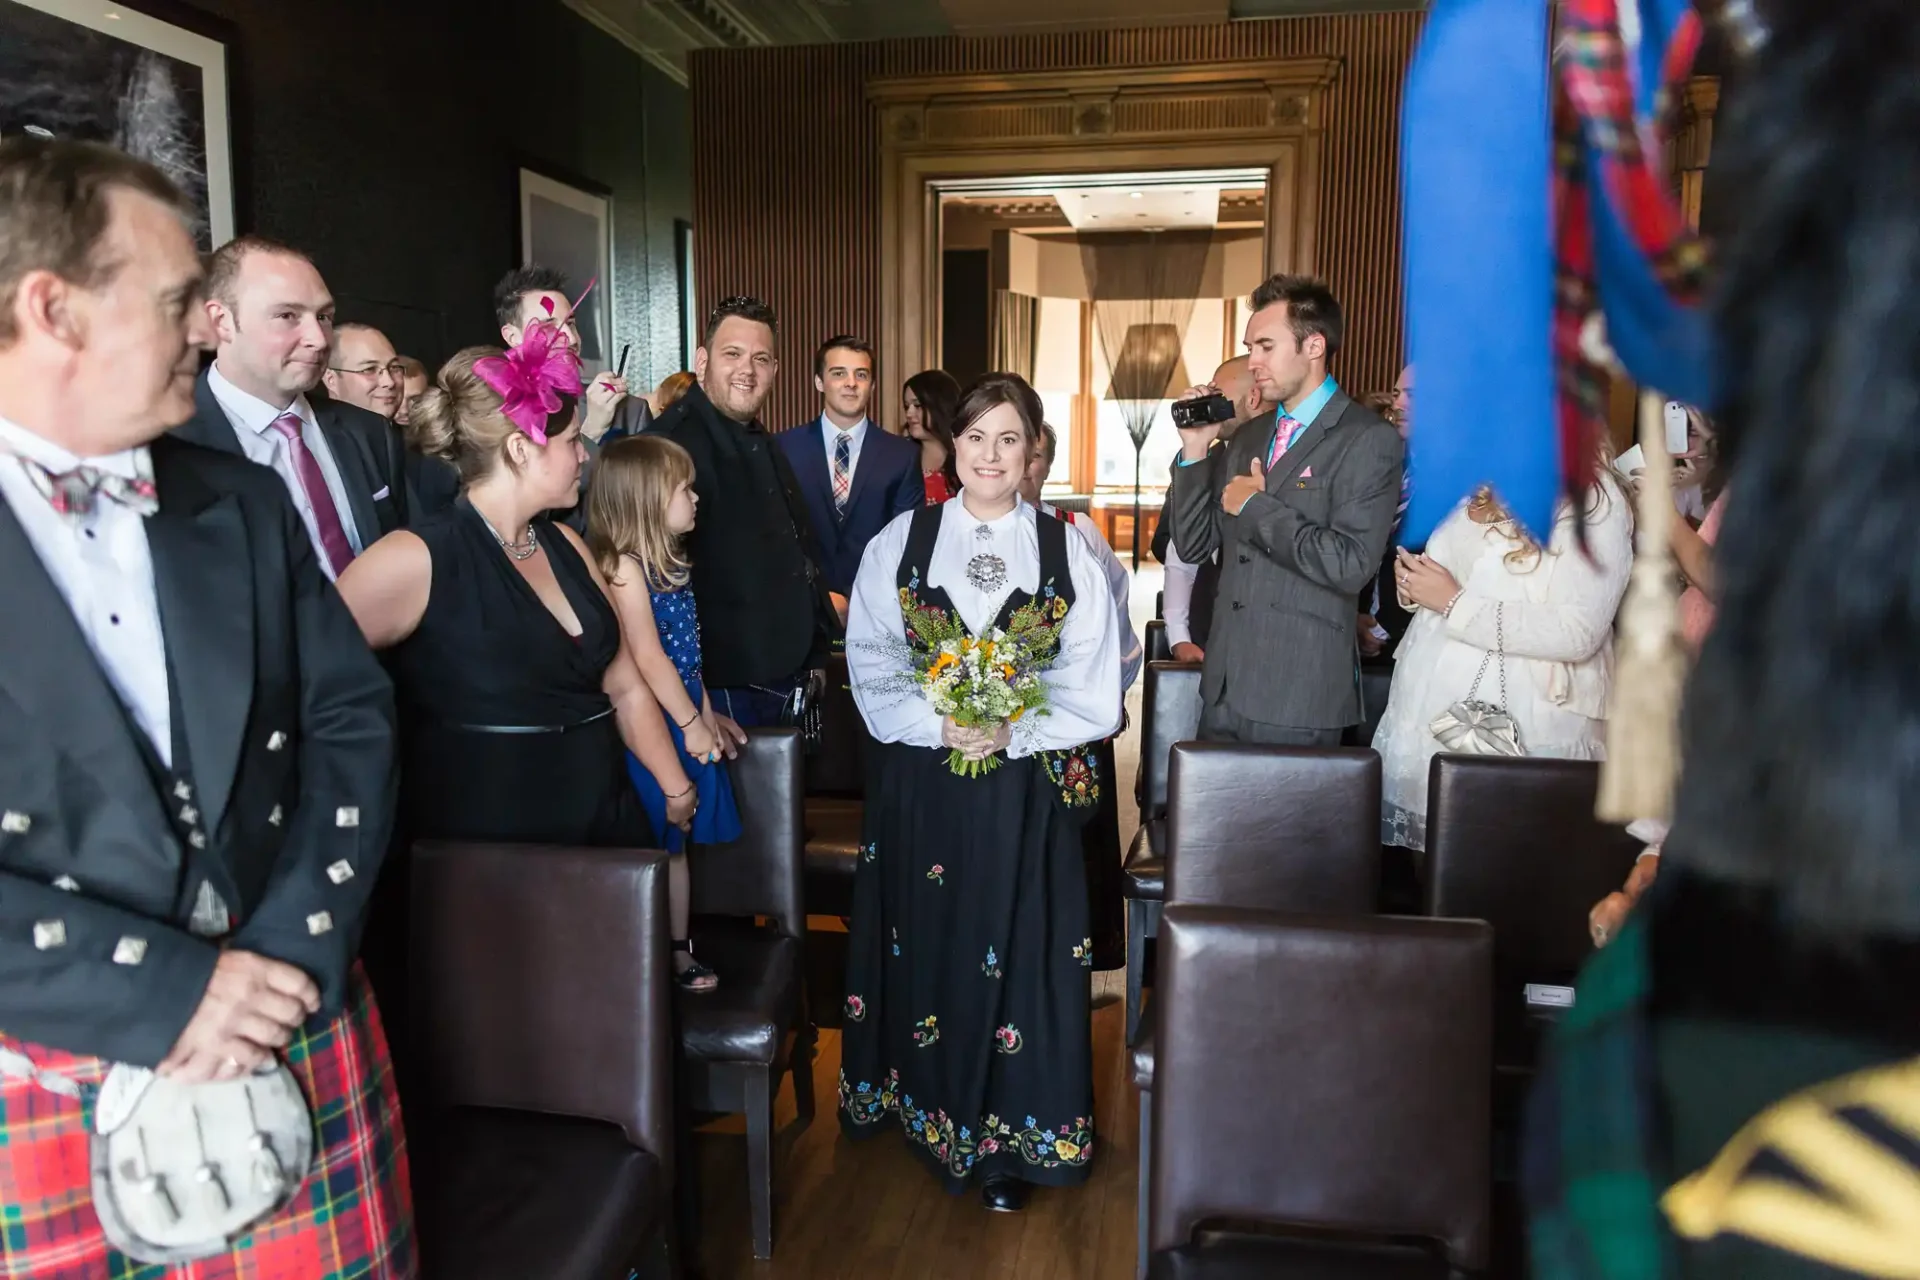 Woman in traditional dress holding a bouquet walks down the aisle at a wedding ceremony, surrounded by guests in various outfits, including kilts.